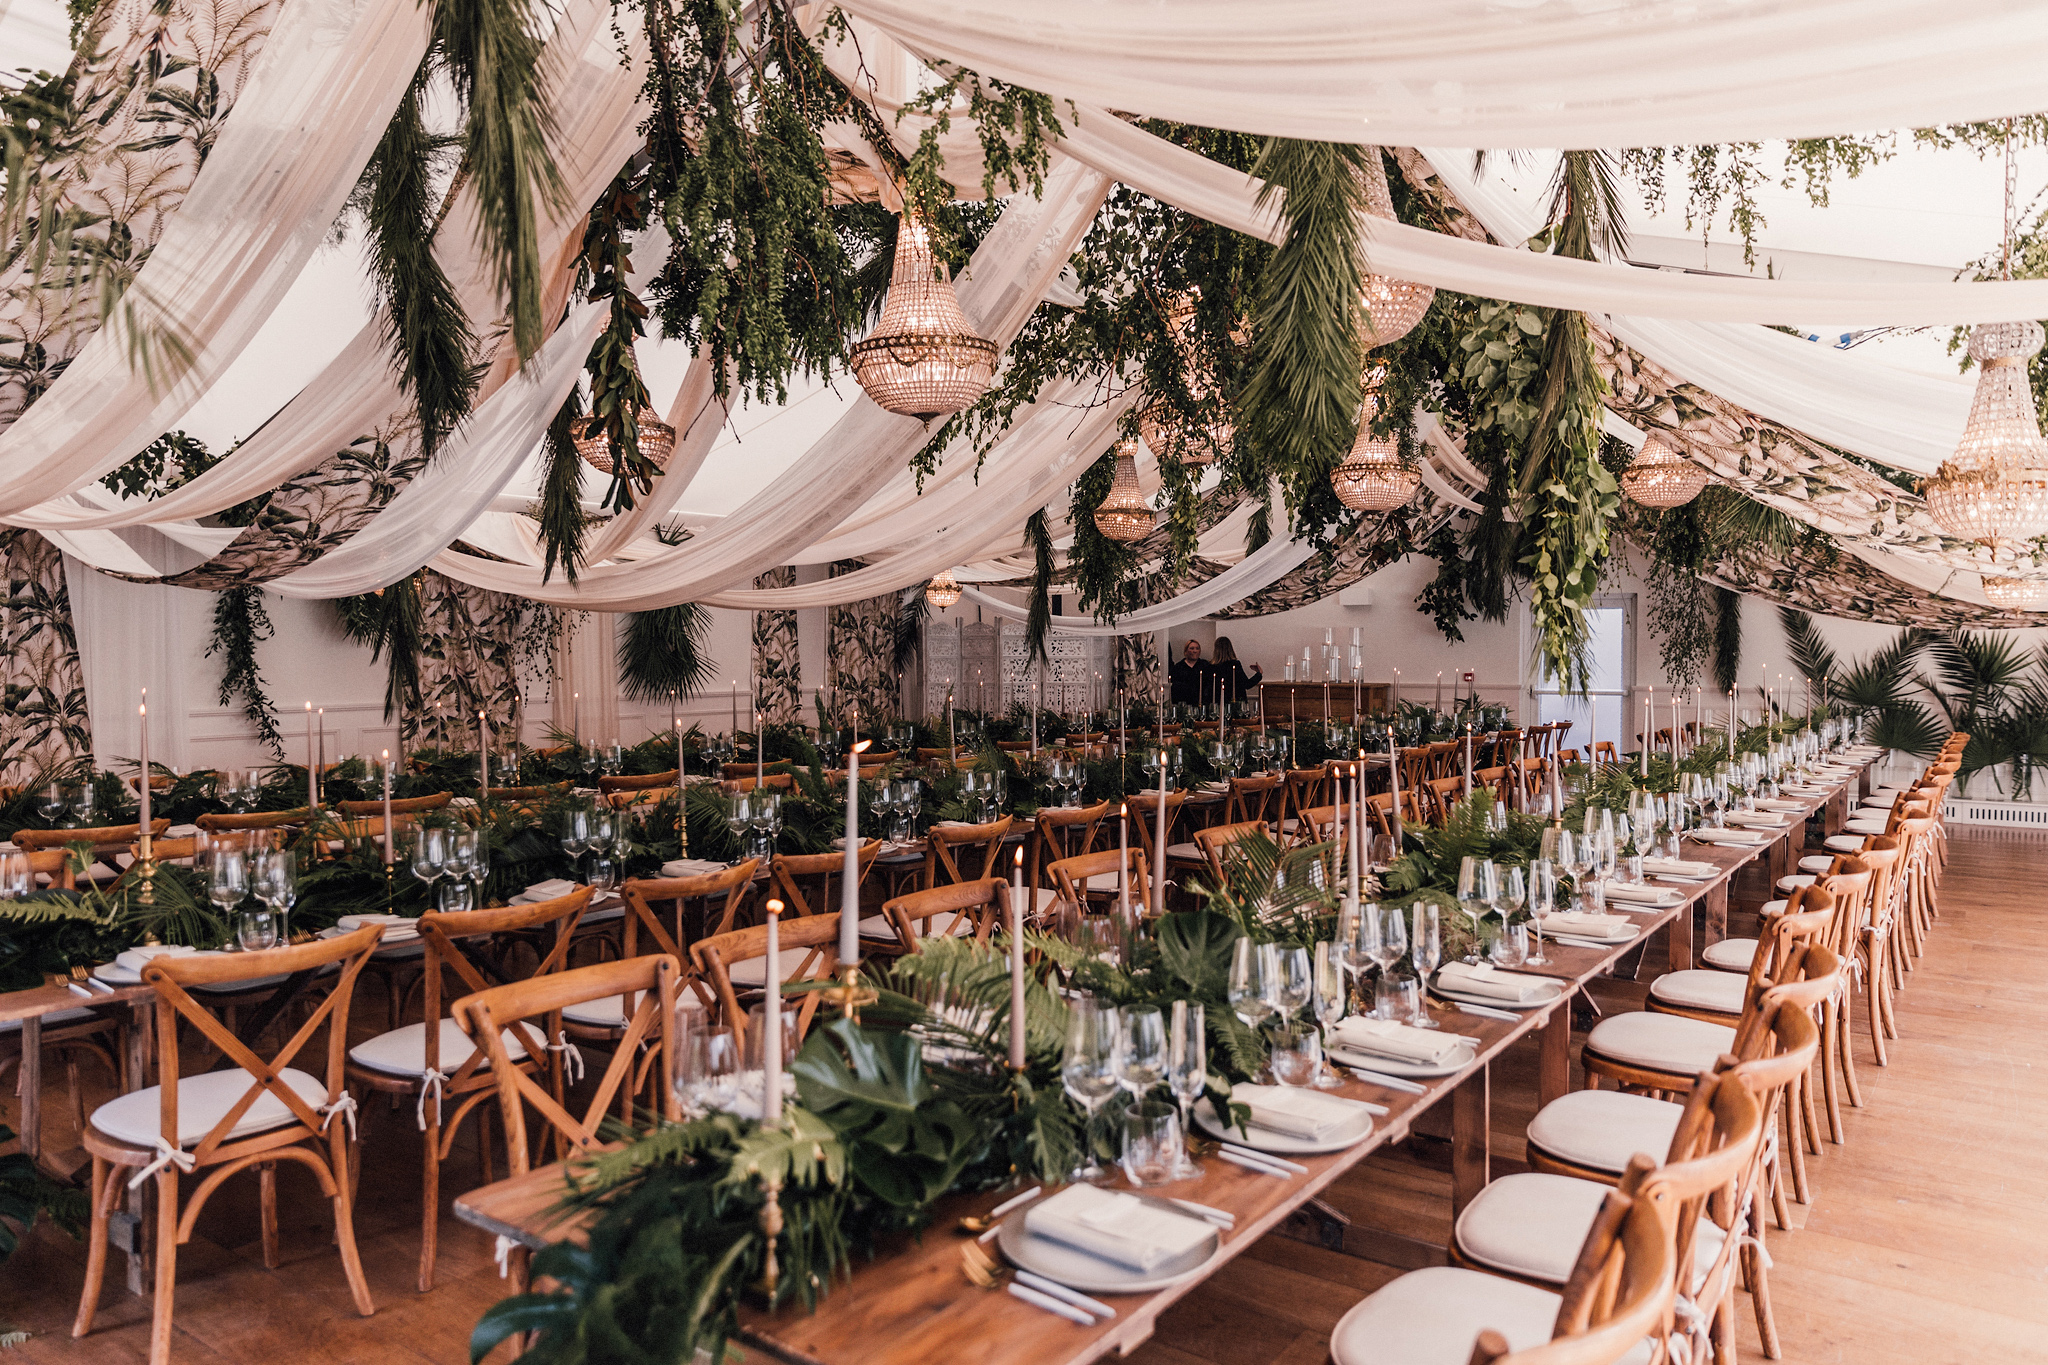 Natural greenery with a dash of luxury wedding marquee inspiration at Iscoyd Park Photographed by SAM DOCKER